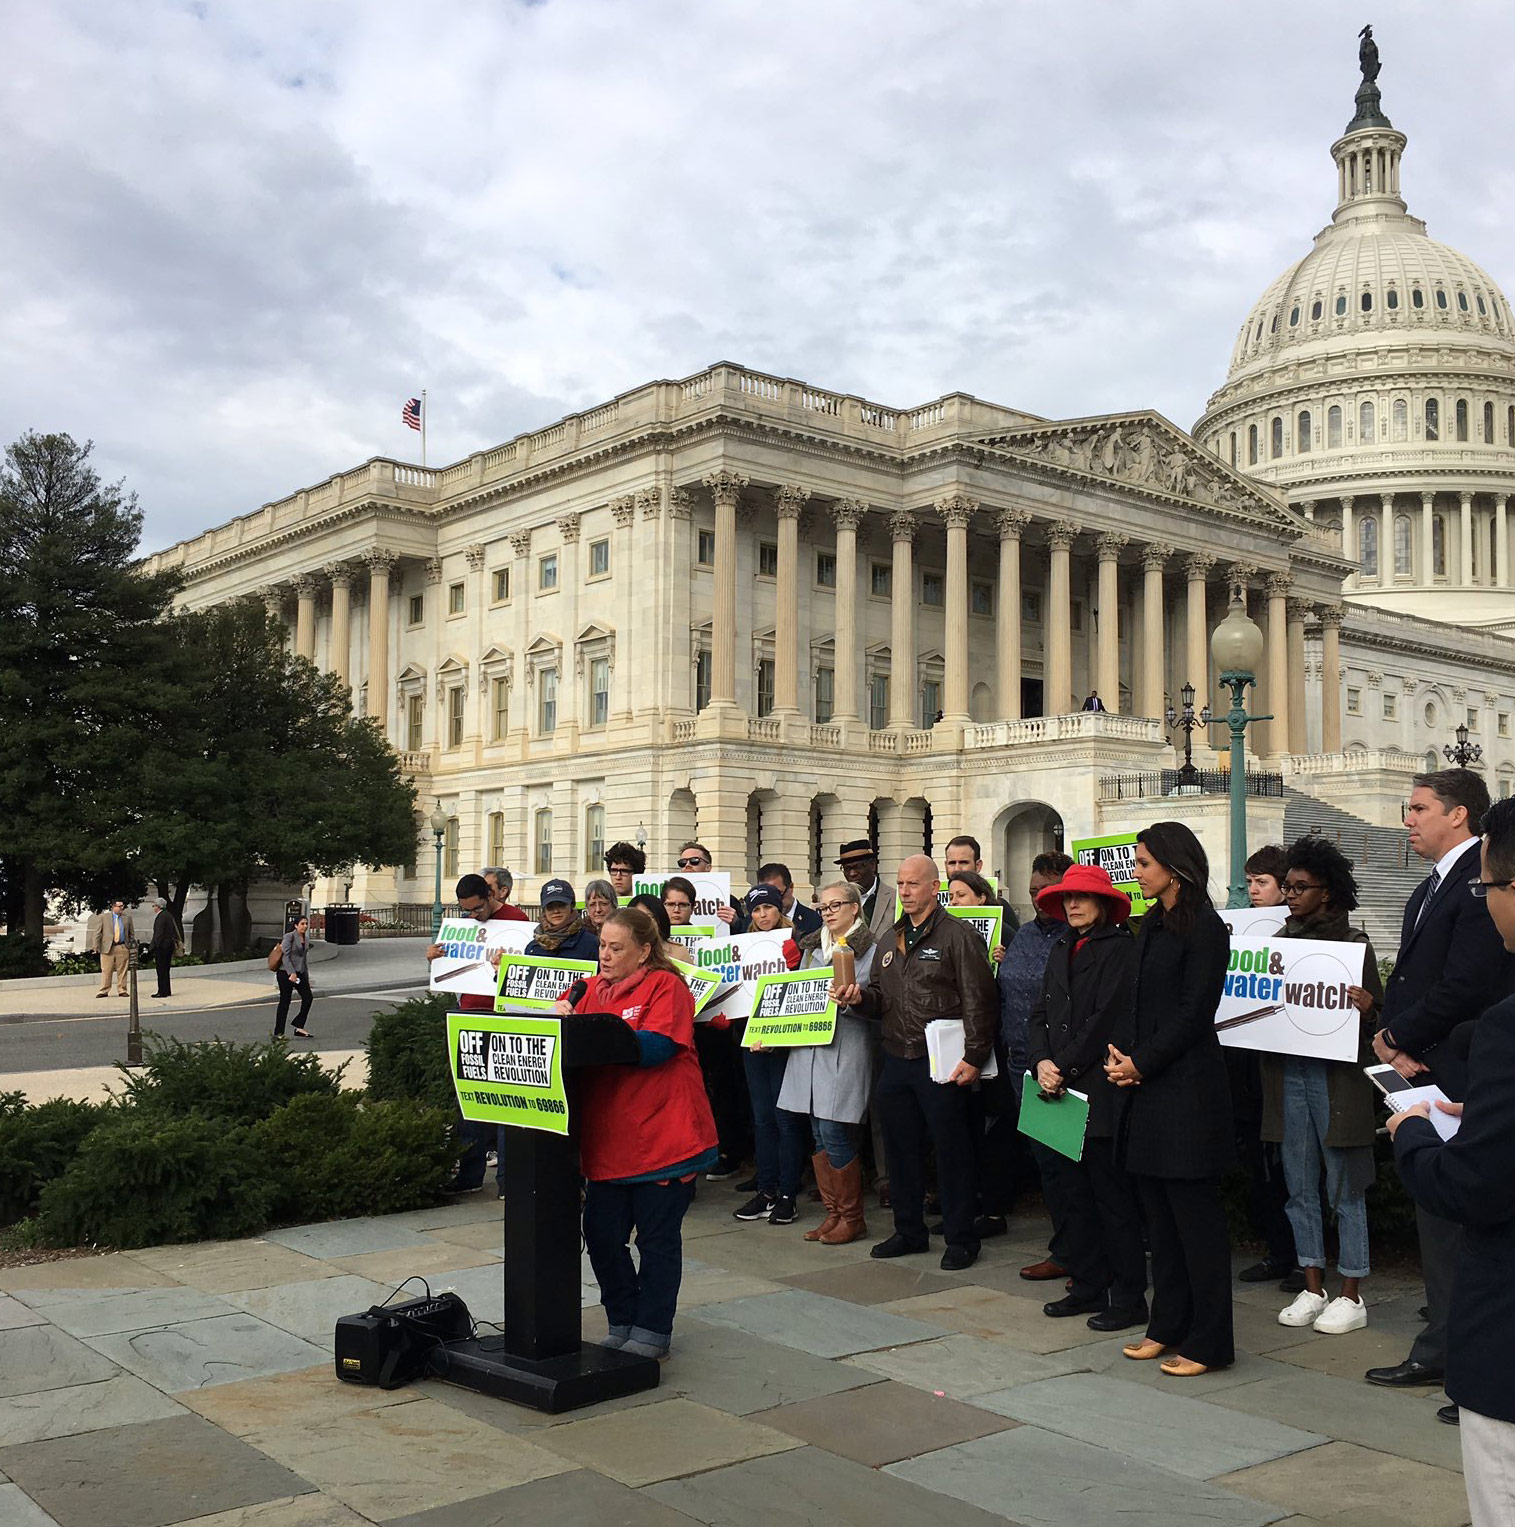 D.C. RN Rita Collins speaks at OFF Act Press conference